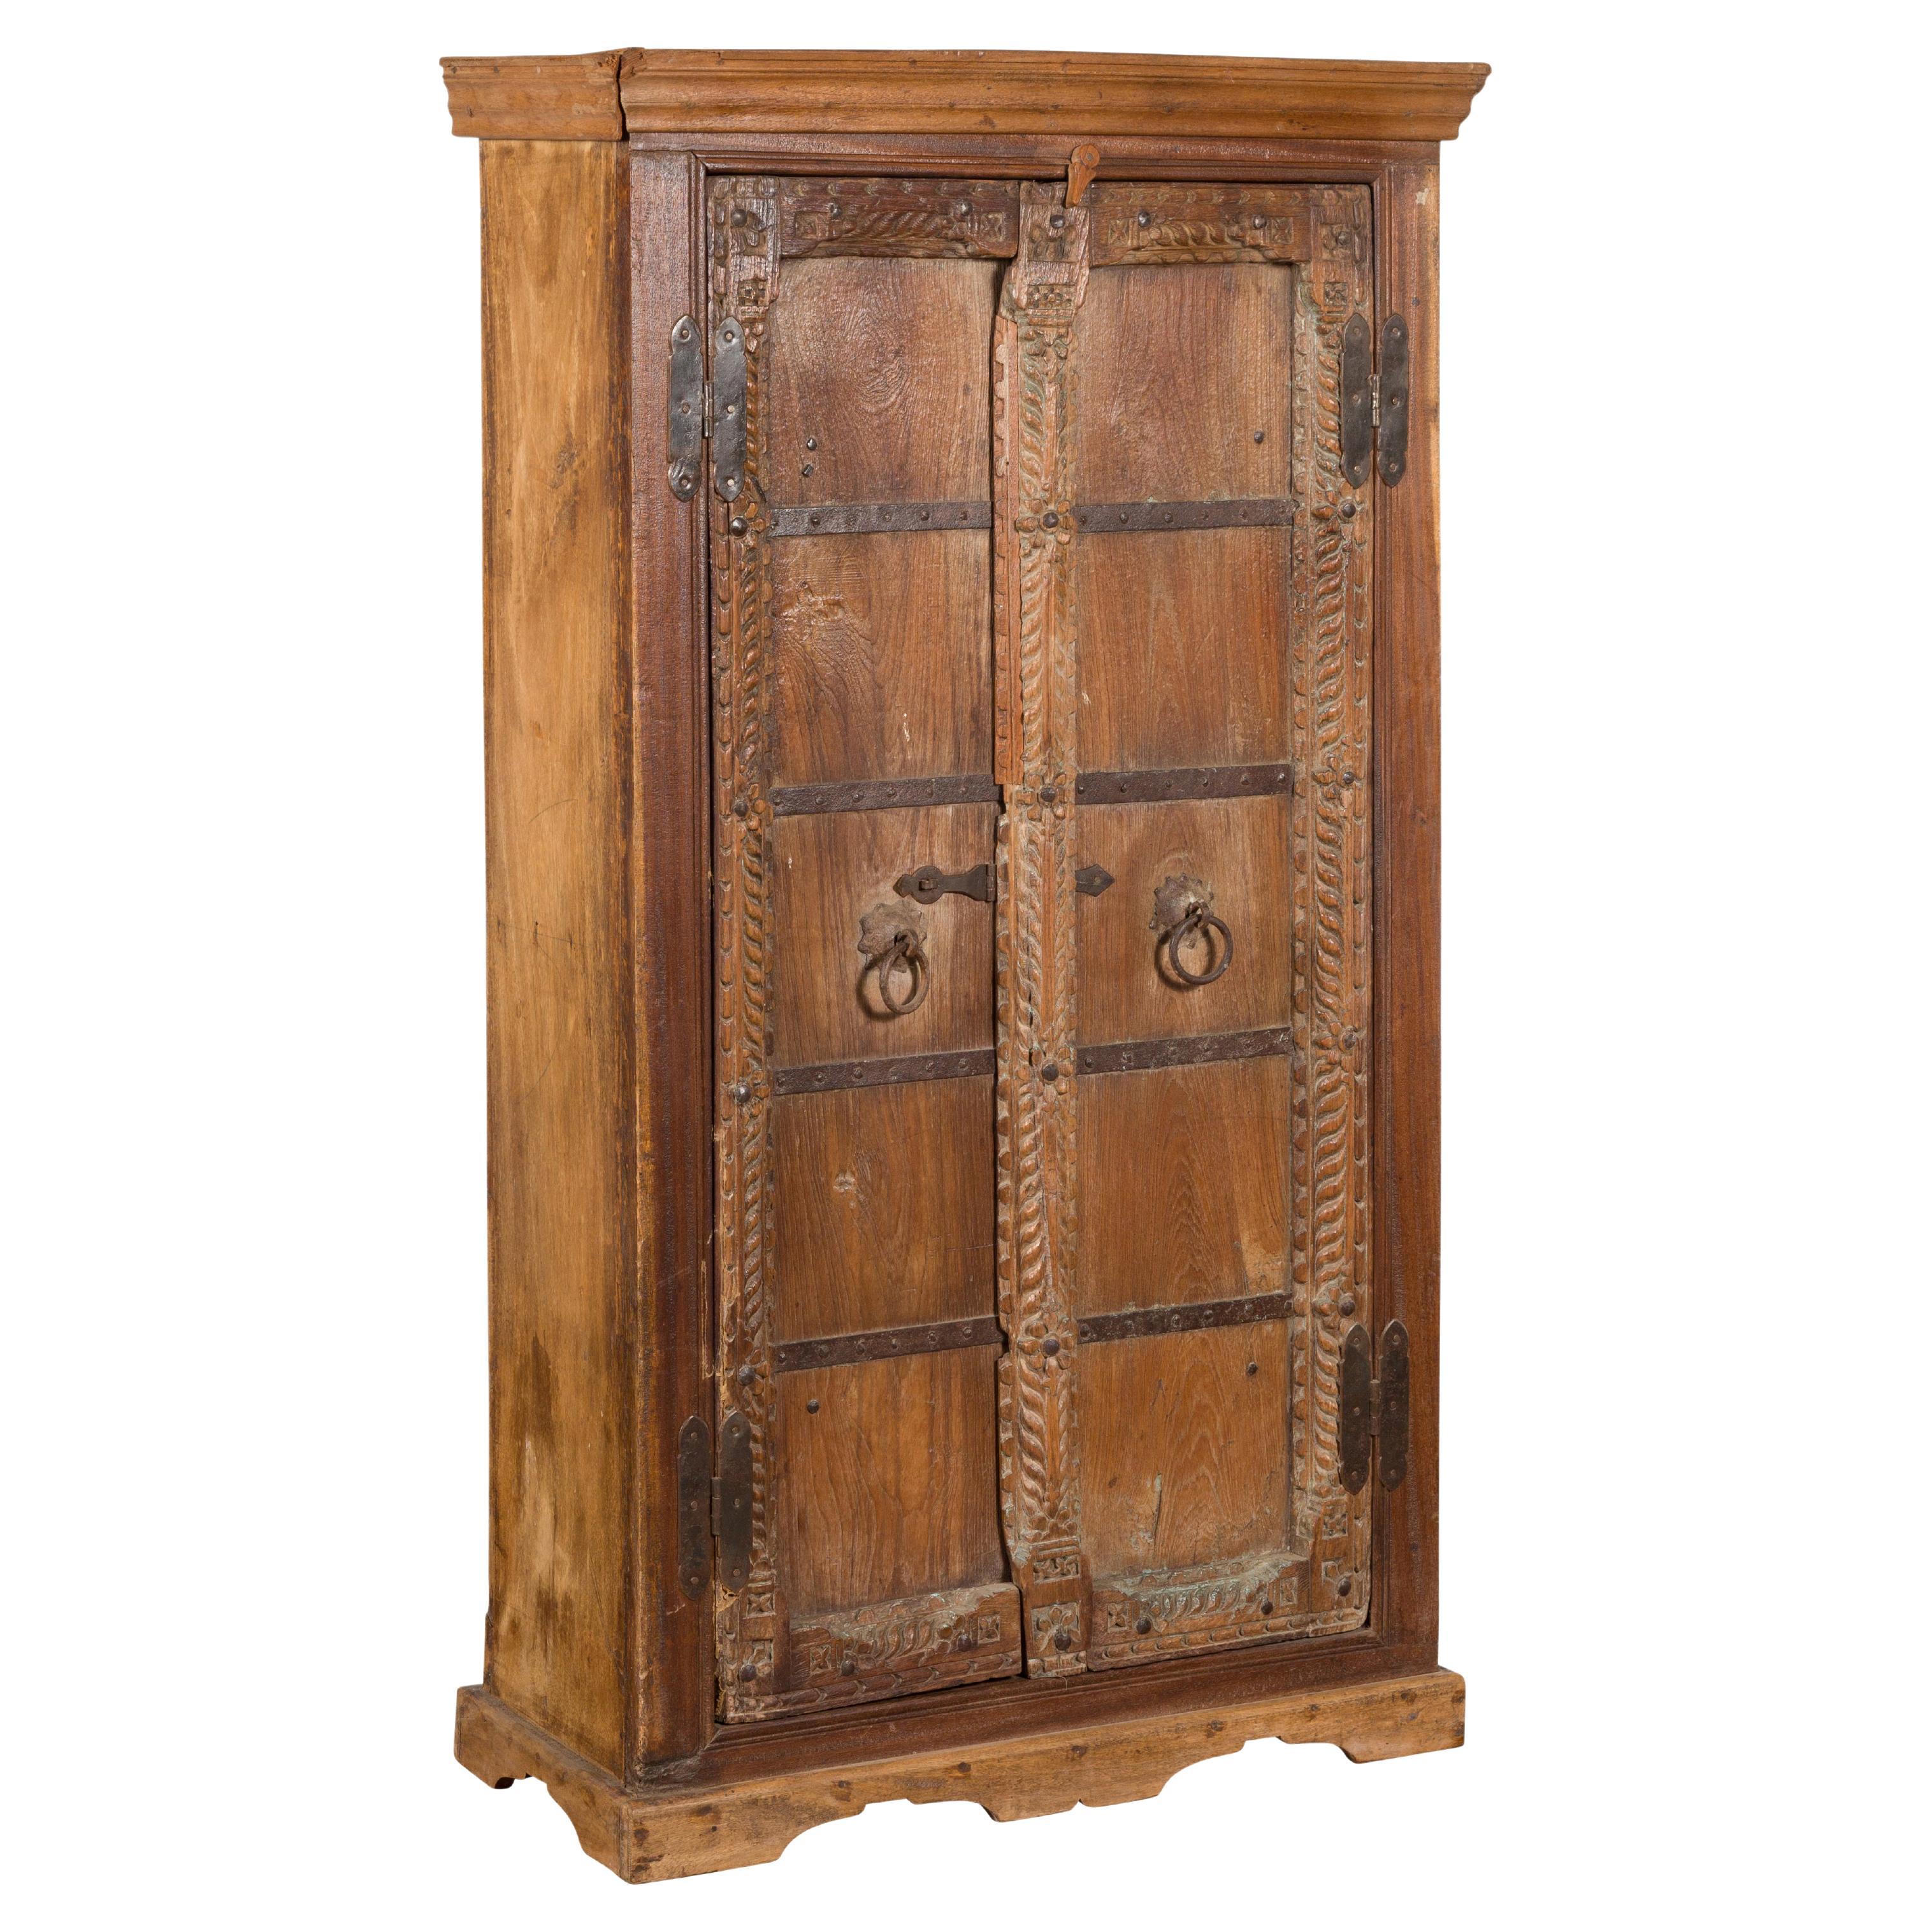 Antique 19th Century Indian Armoire with Metal Braces and Hand-Carved Décor